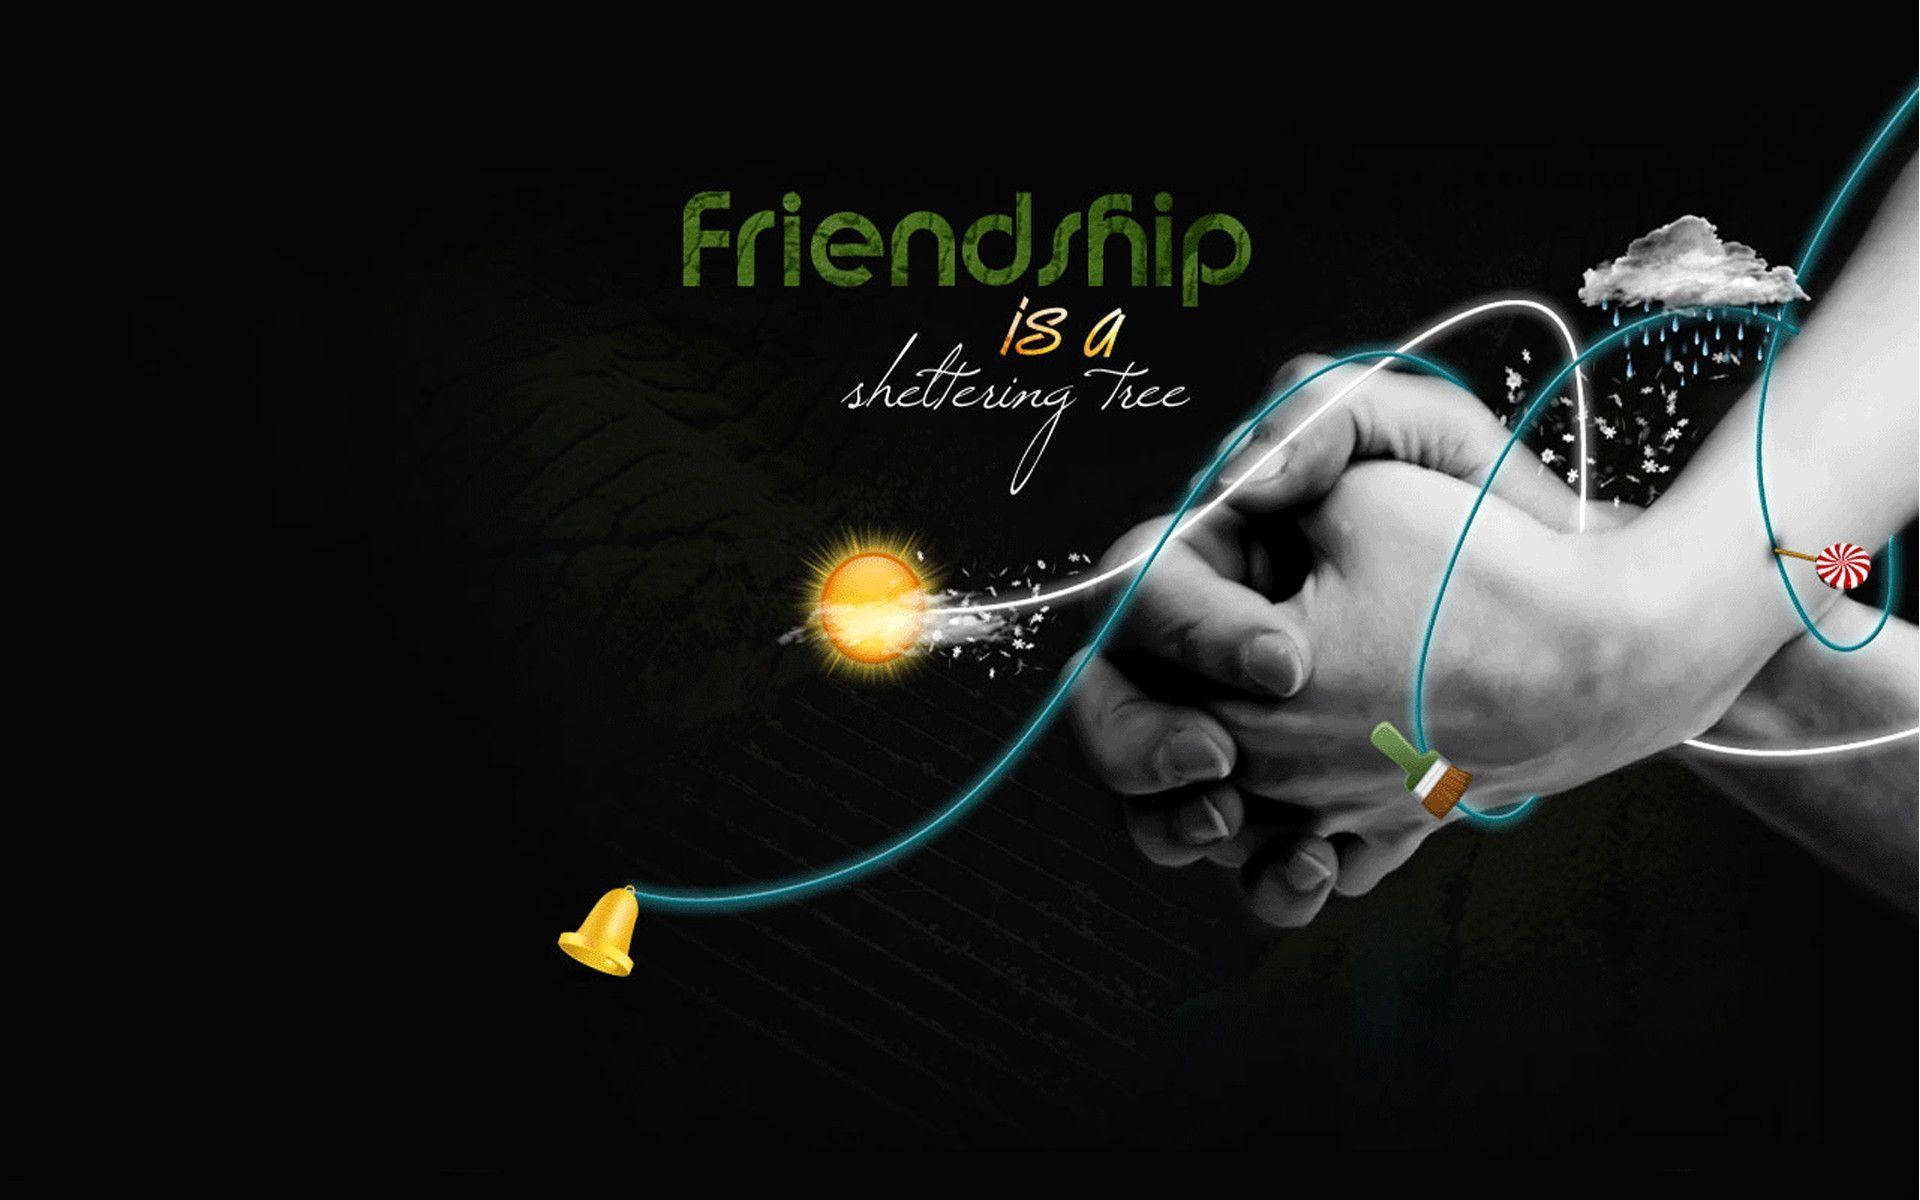 Free Friendship Wallpaper Downloads, [100+] Friendship Wallpapers for FREE  